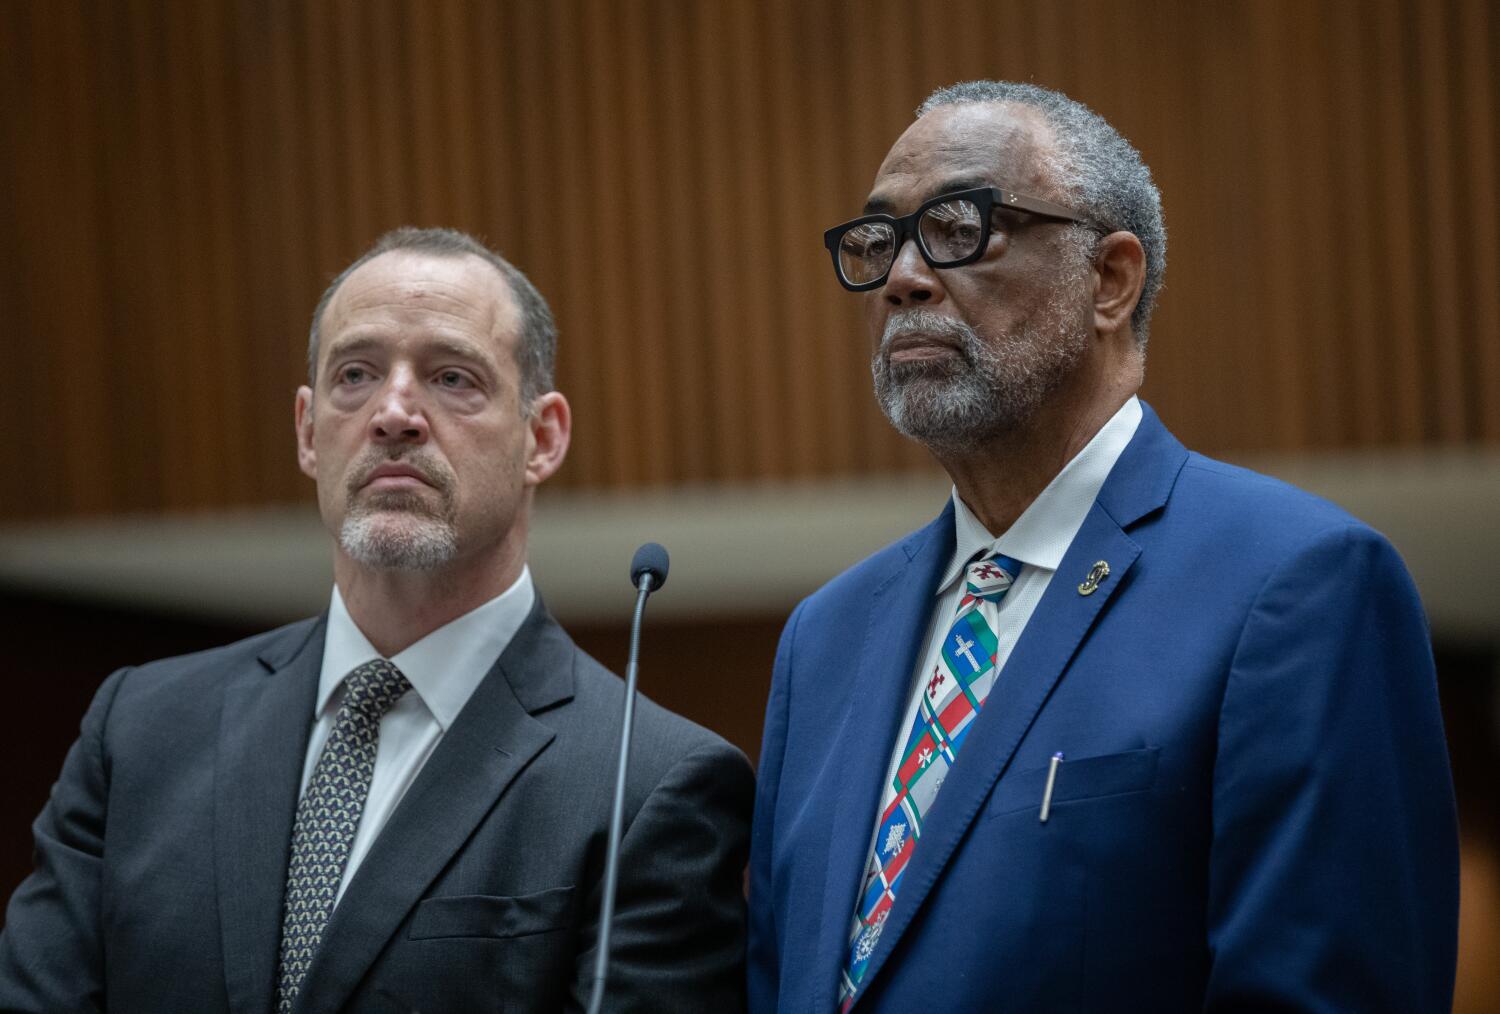 L.A. City Councilman Curren Price challenges perjury, embezzlement charges 